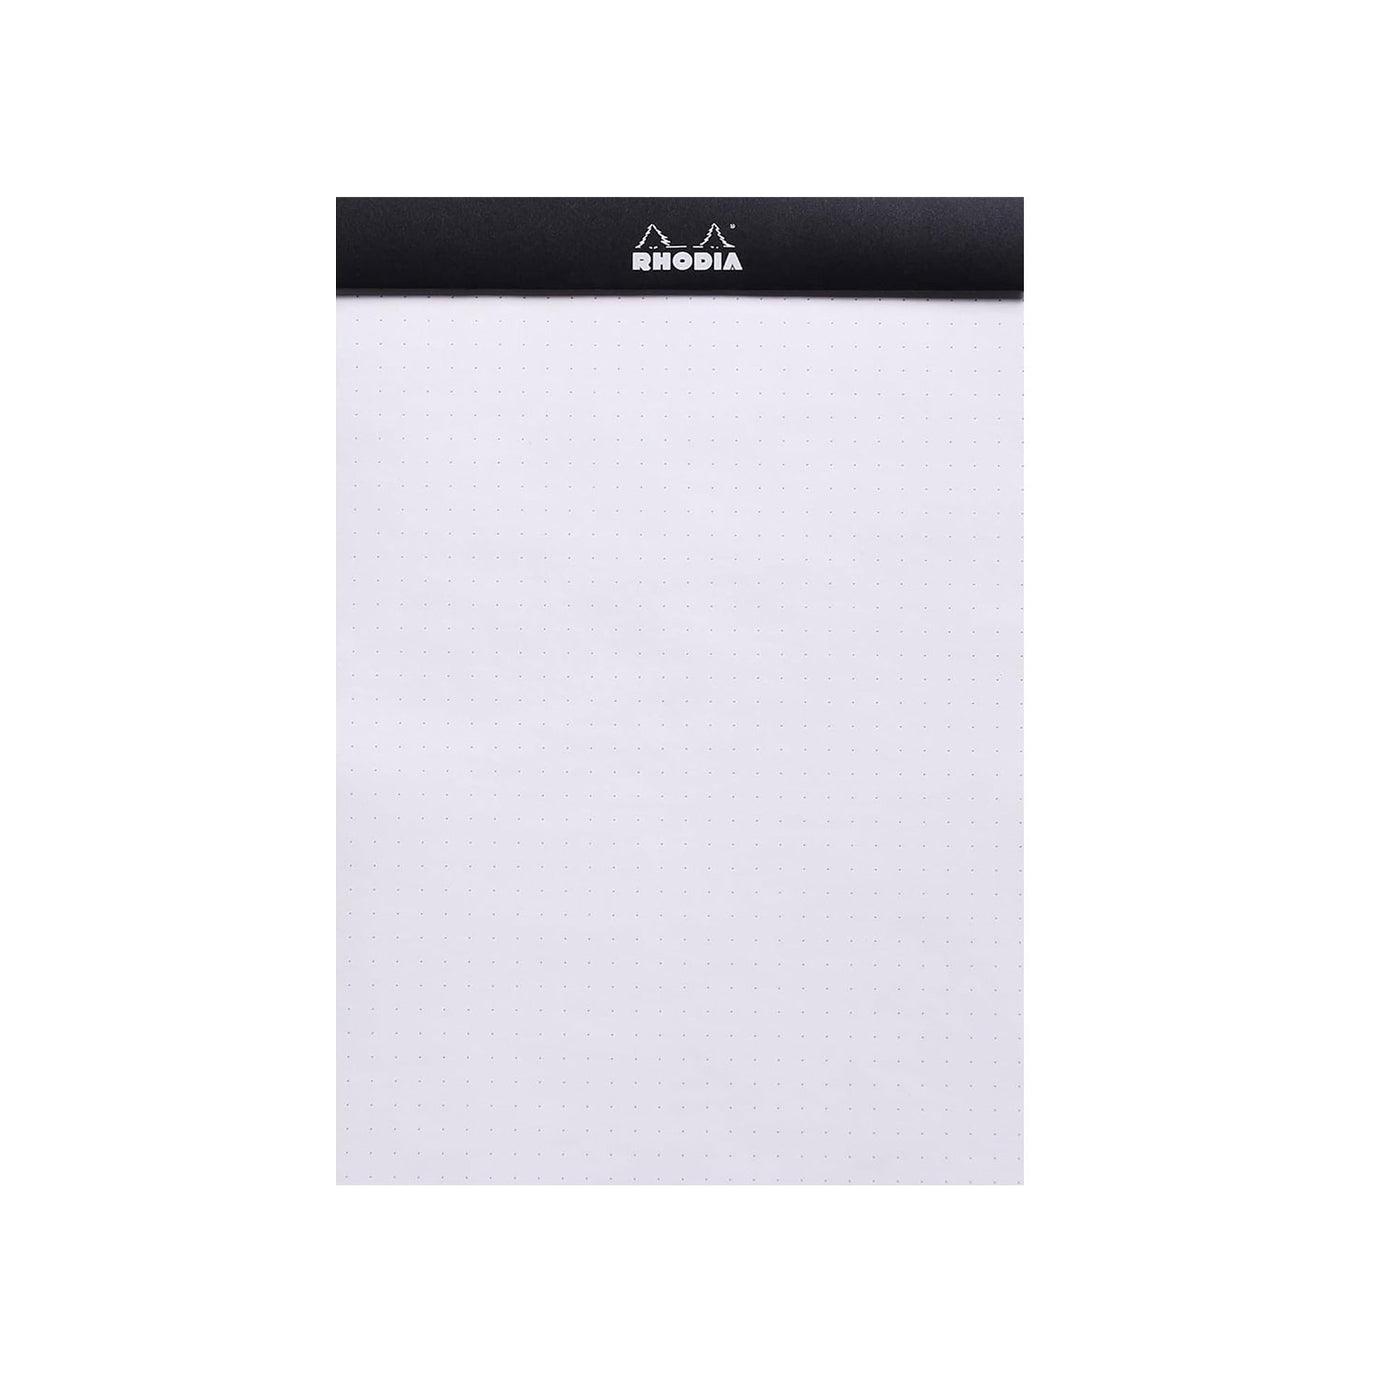 Rhodia No.16 Black Notepad - A5 Dotted 2